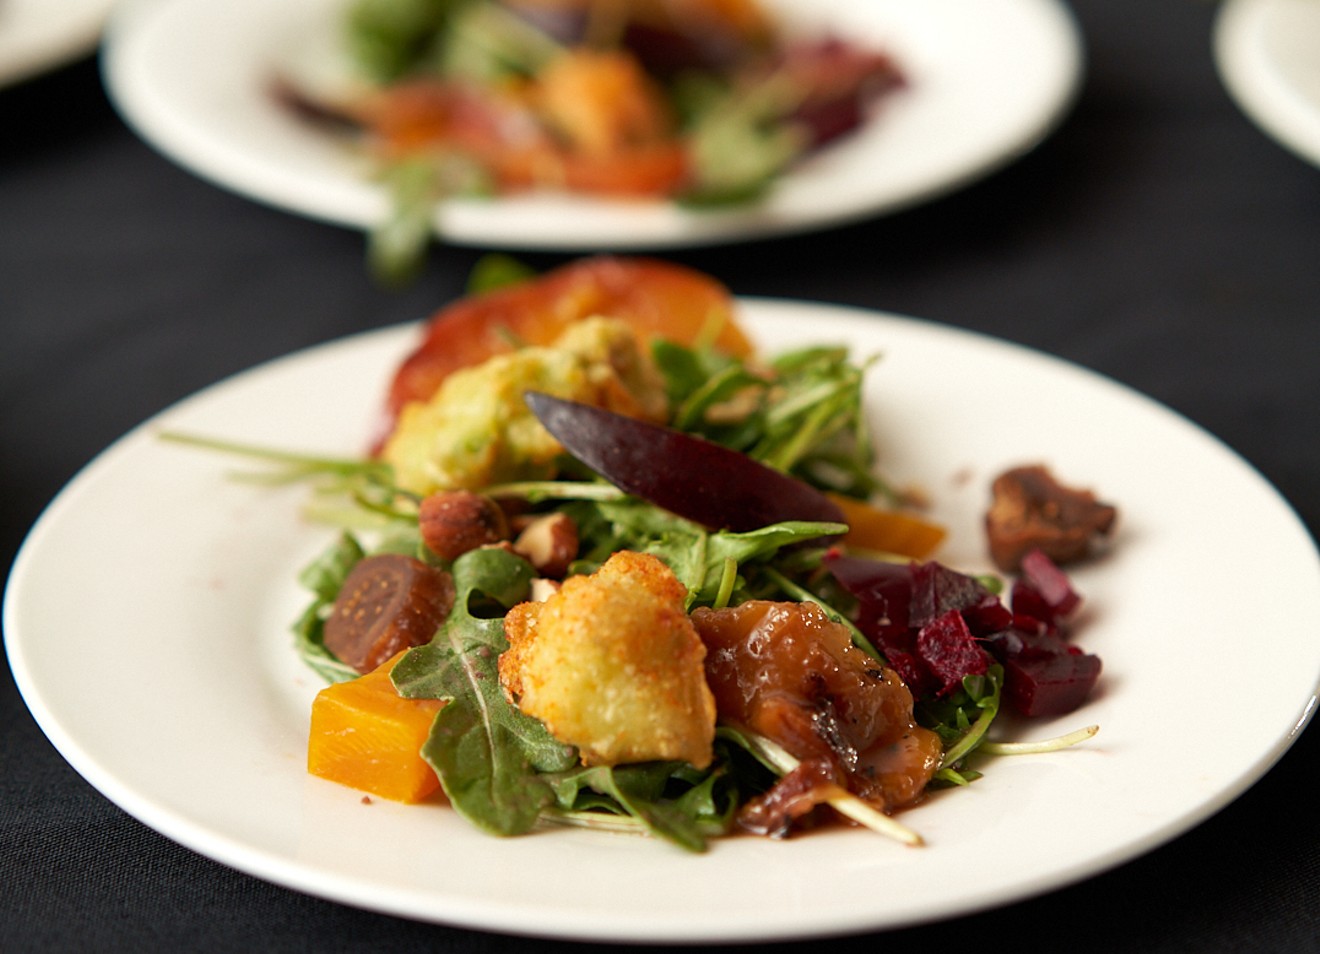 A summer beet salad led the way for an evening of food and conversation.